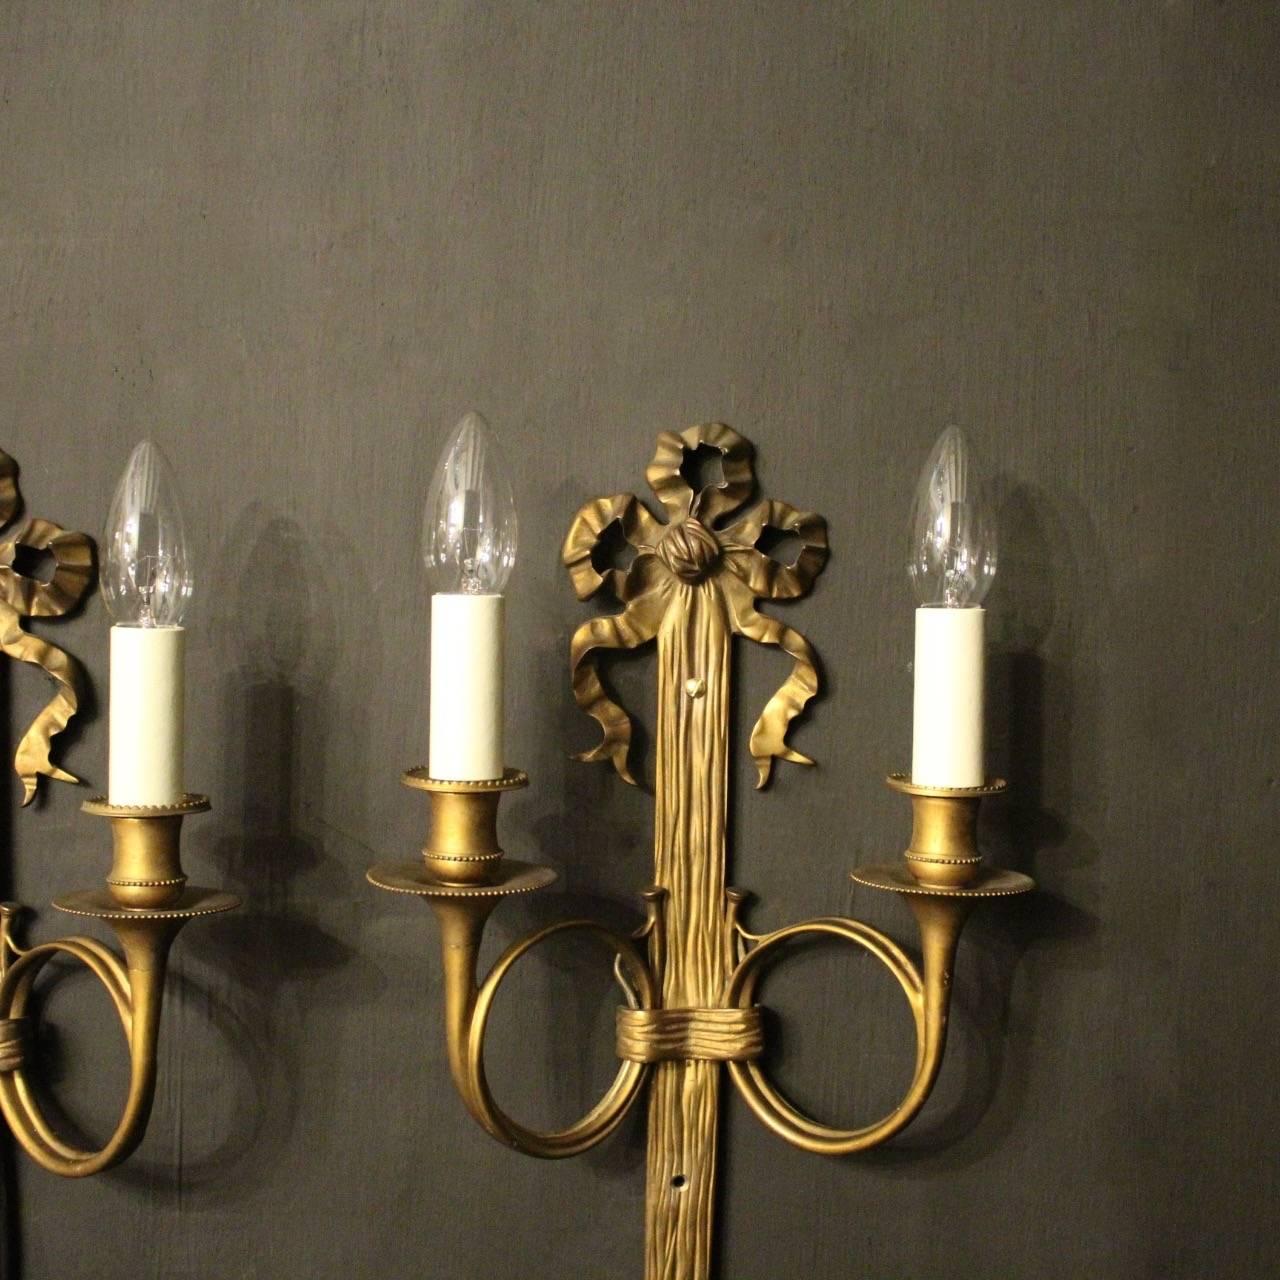 A French pair of gilded bronze twin arm ribbon antique wall sconces, the scrolling arms with trumpet bobeche drip pans and bulbous millgrain candle sconces, issuing from a reeded tassel backplate with pierced ribbon finial, good original gilded